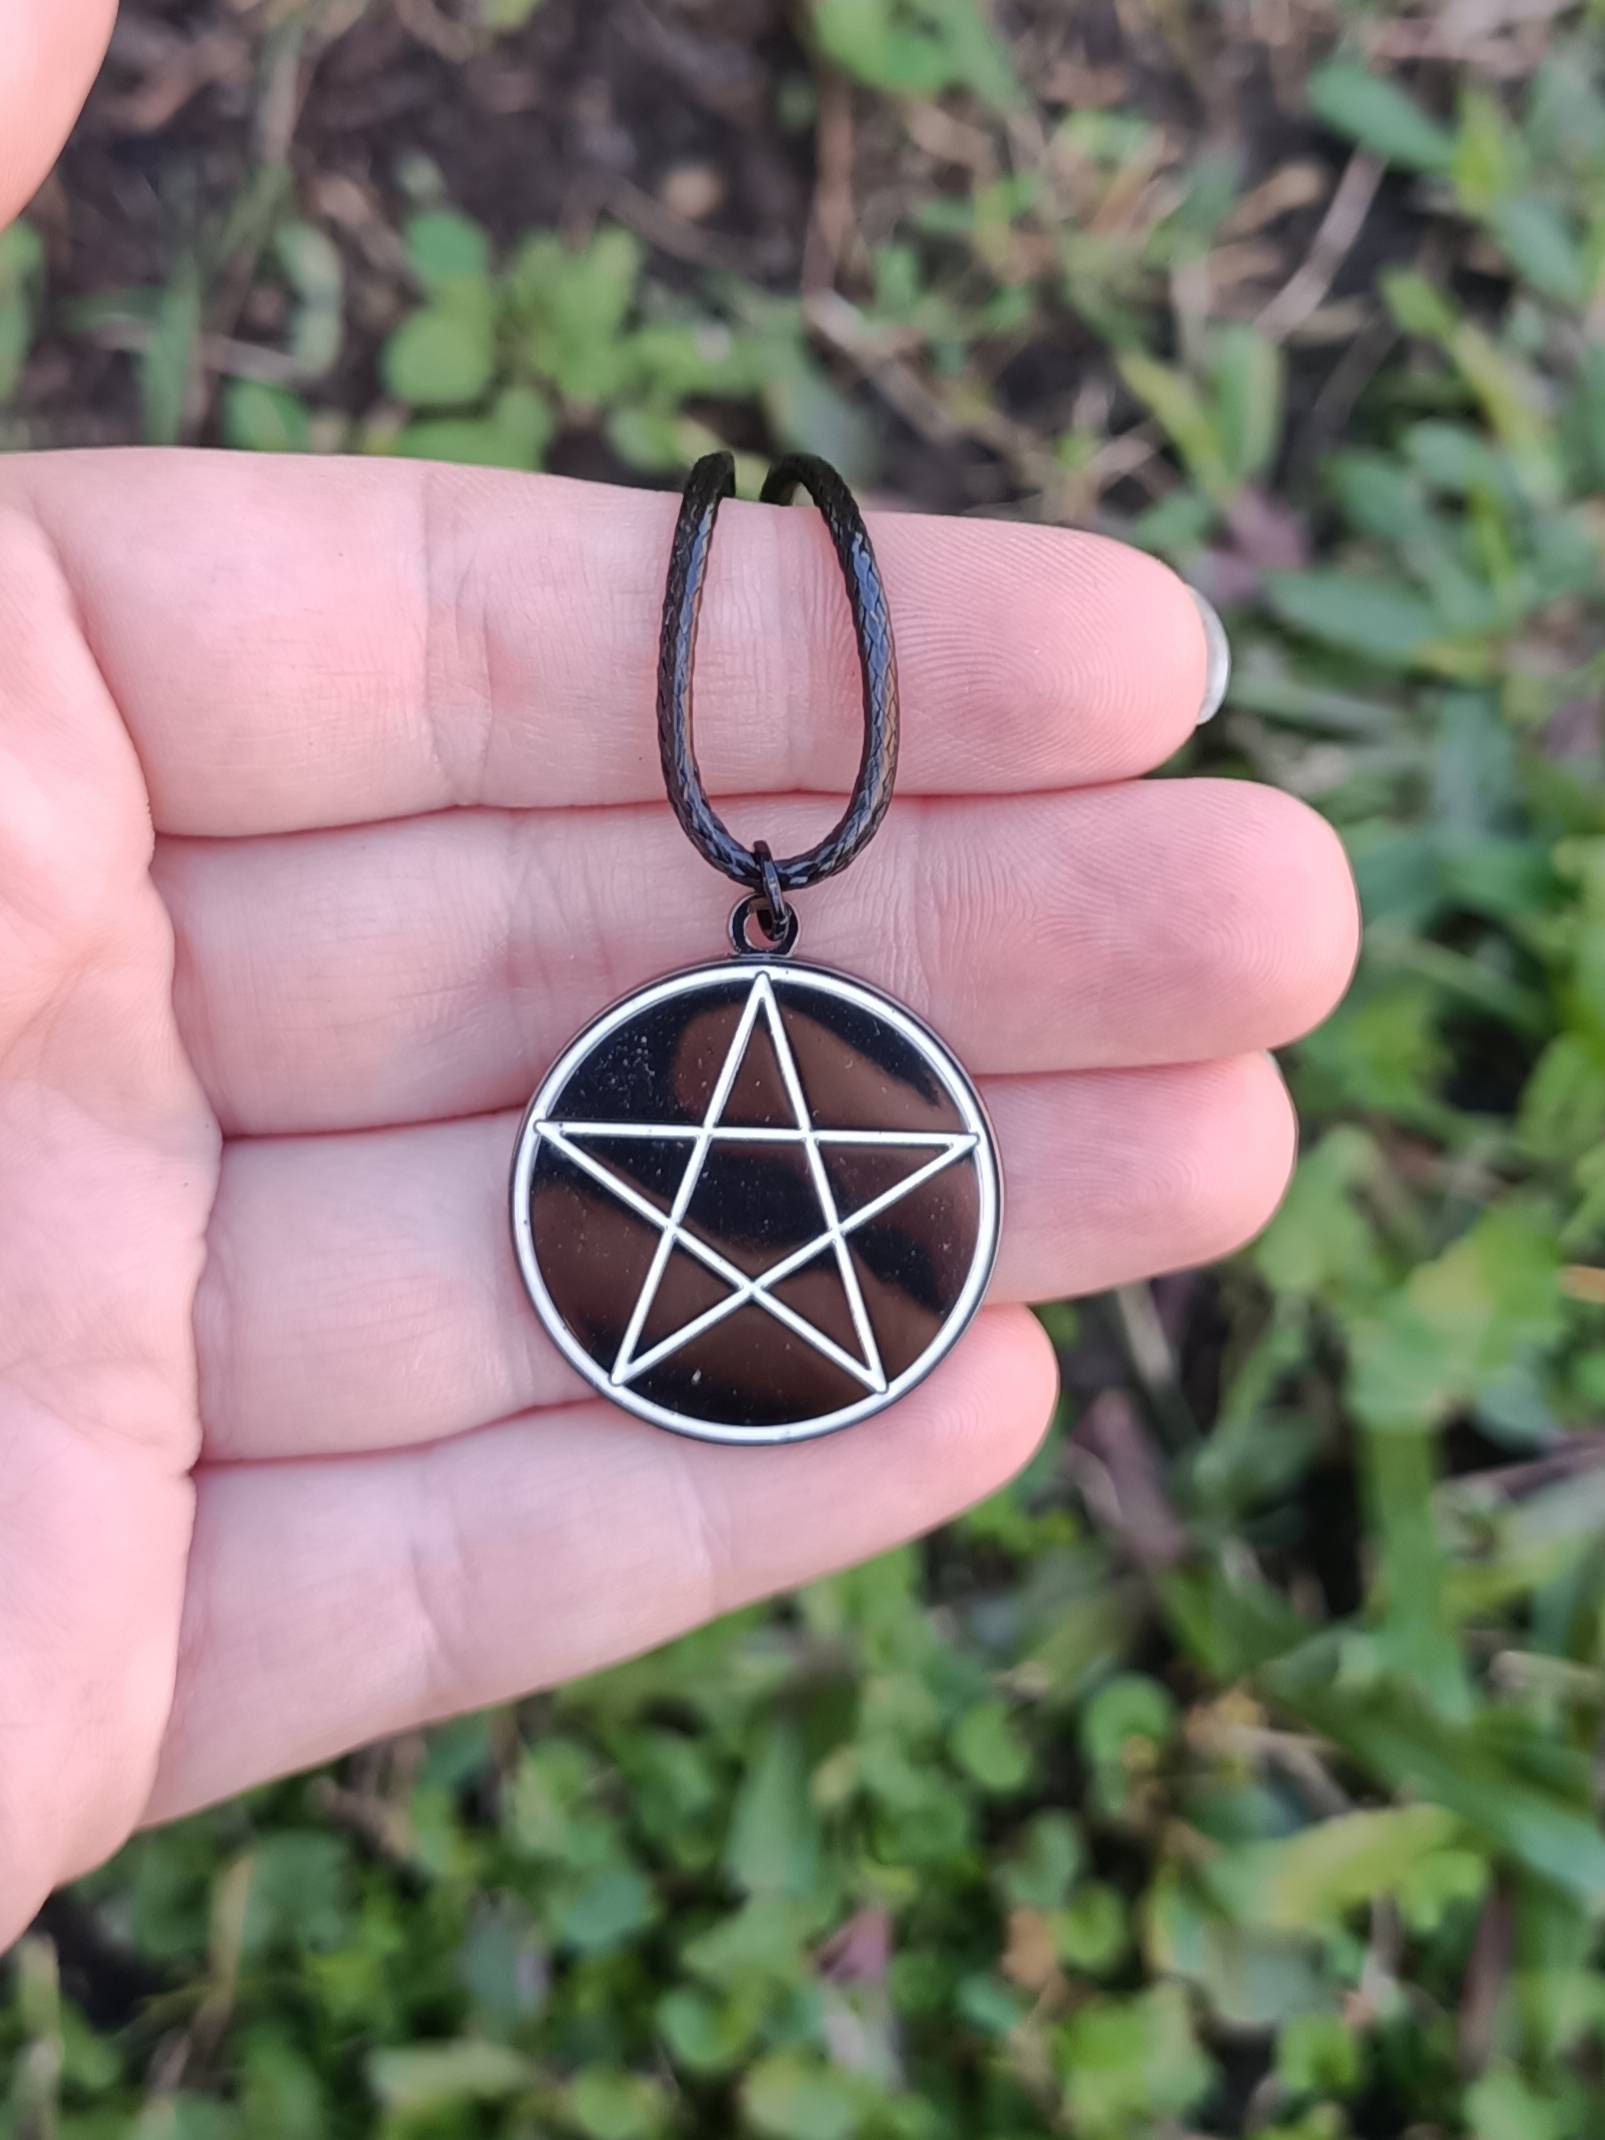 Amulet PENTAGRAM Wicca Pagan Druid Gothic w/ info Pentacle and crystal necklace 